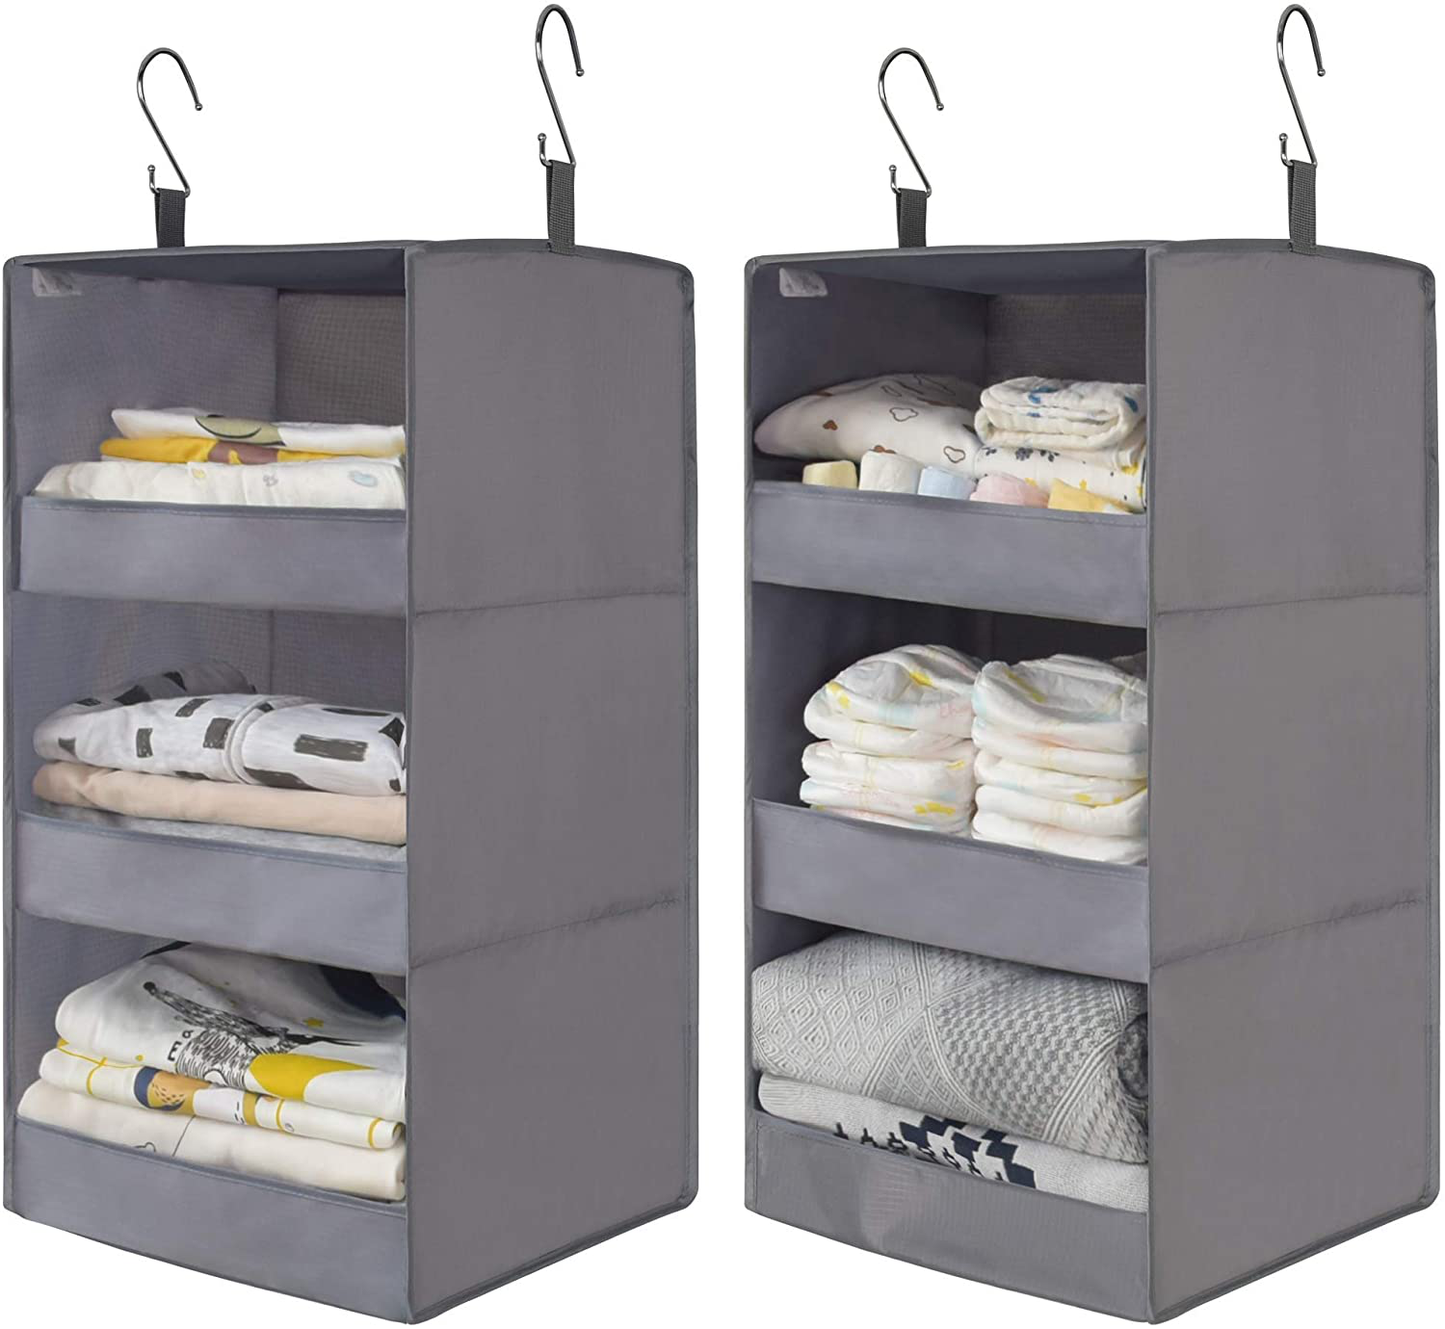 GRANNY SAYS Two 3-Shelf Hanging Closet Organizers, Collapsible Closet Hanging Shelves, Nursery Hanging Organizers, Ash Gray, 28.9" H X 12.2" W X 12.2" D, 2-Pack